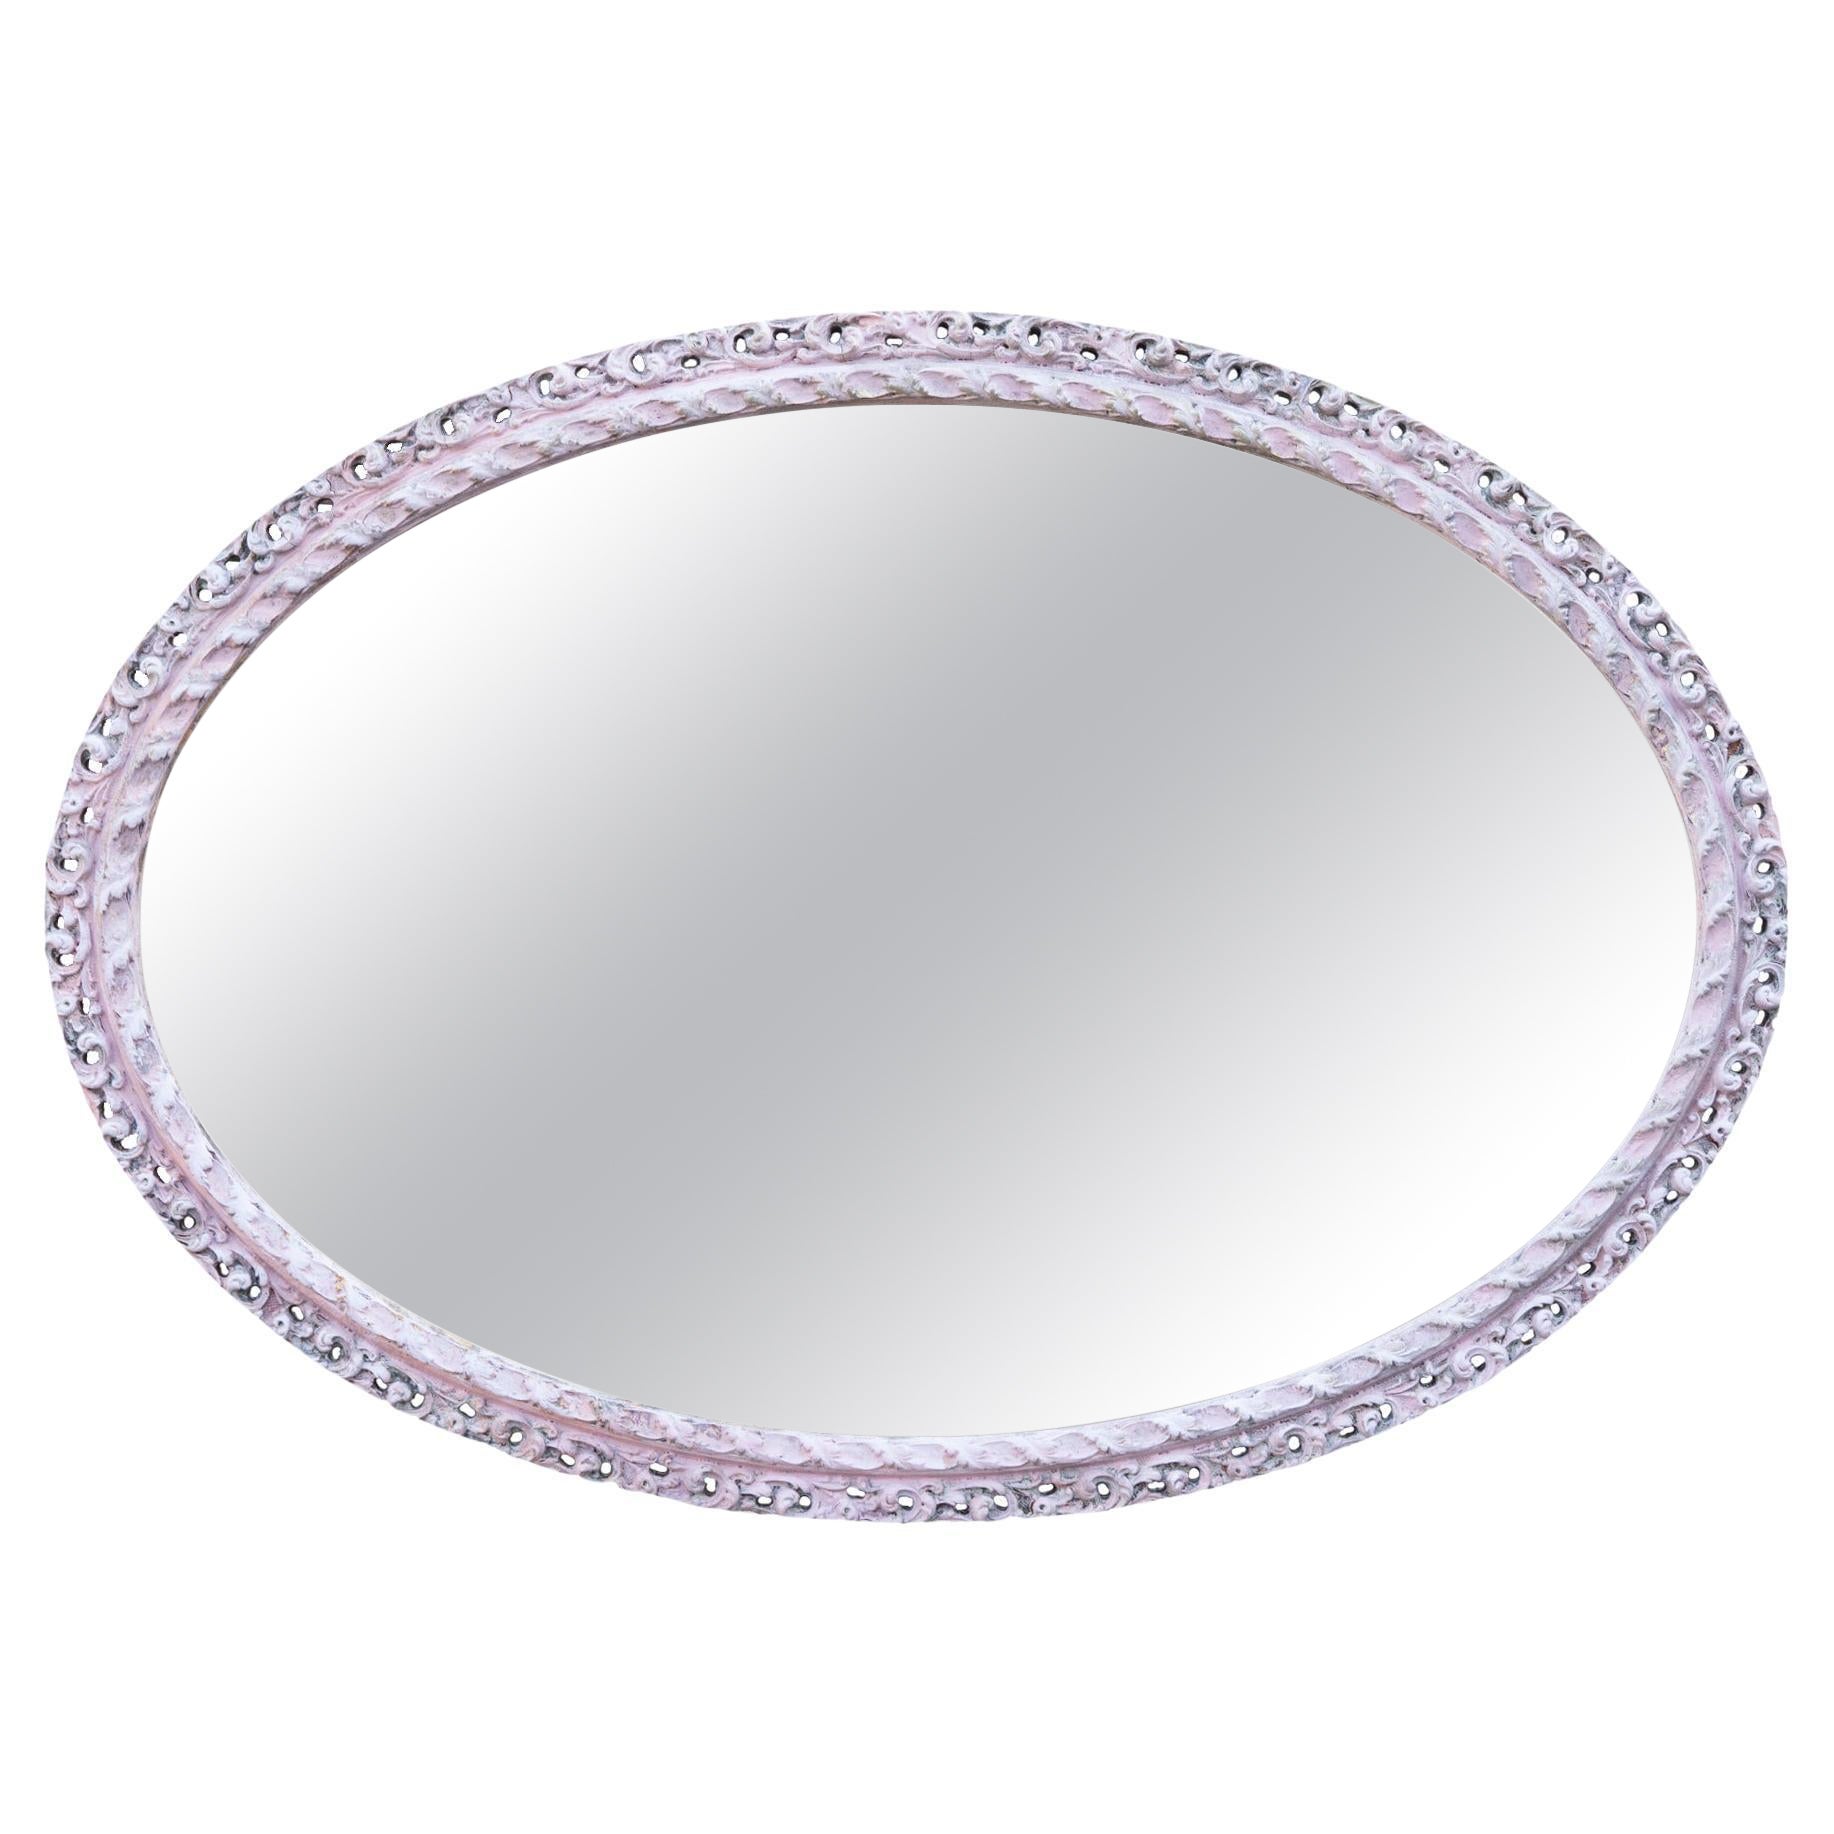 Handpainted Victorian Style Oval Mirror in Pale Pink For Sale